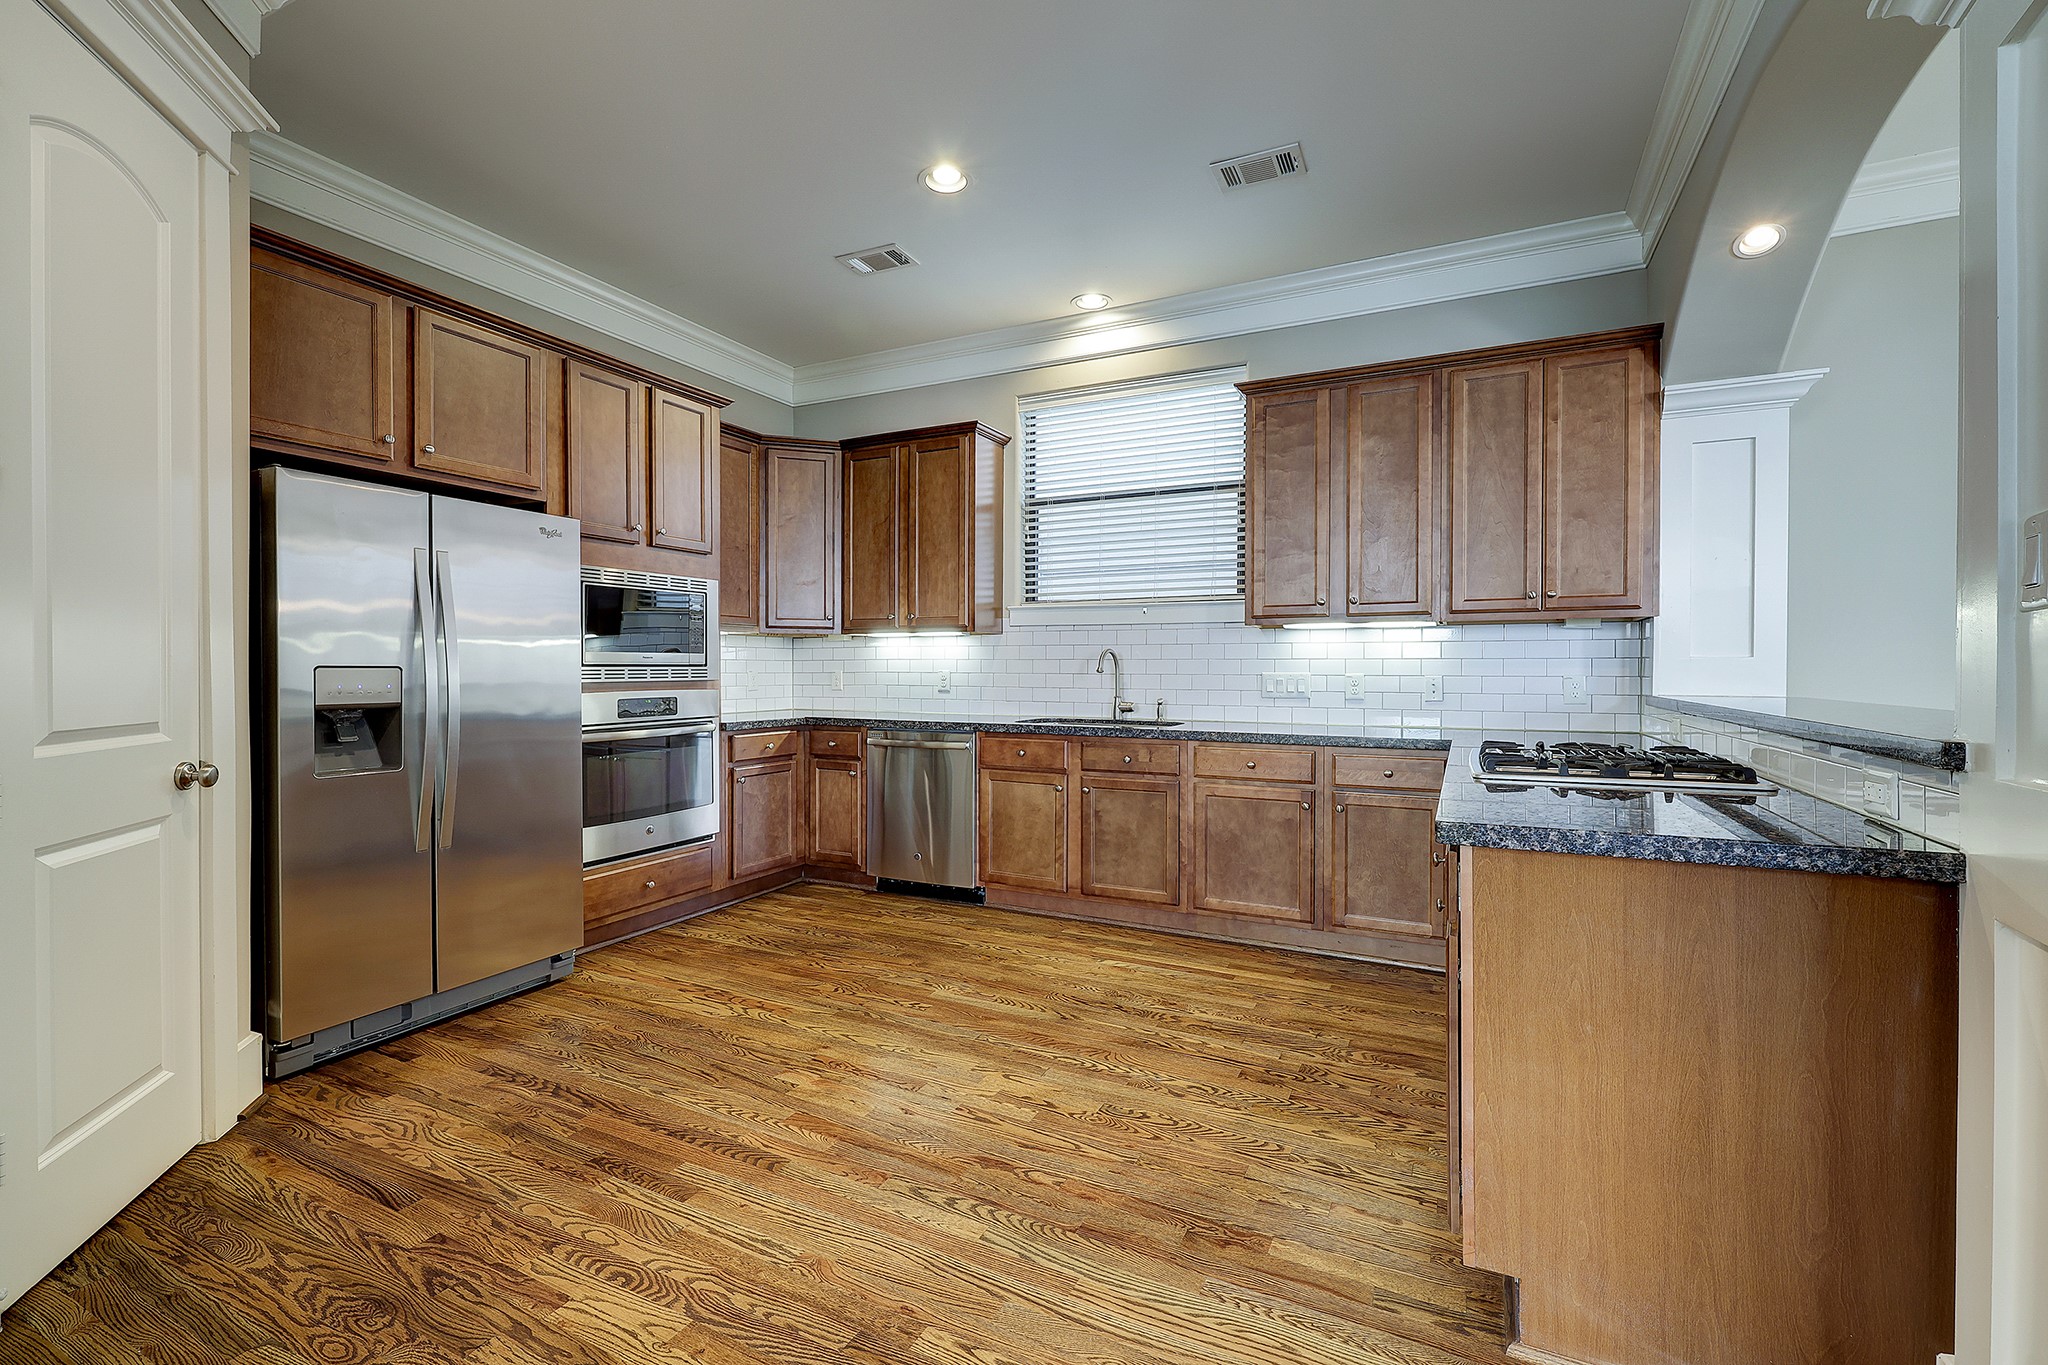 This glamorous kitchen shines with hardwood floors, stainless steel appliances, large pantry and crown molding (refrigerator stays with home).